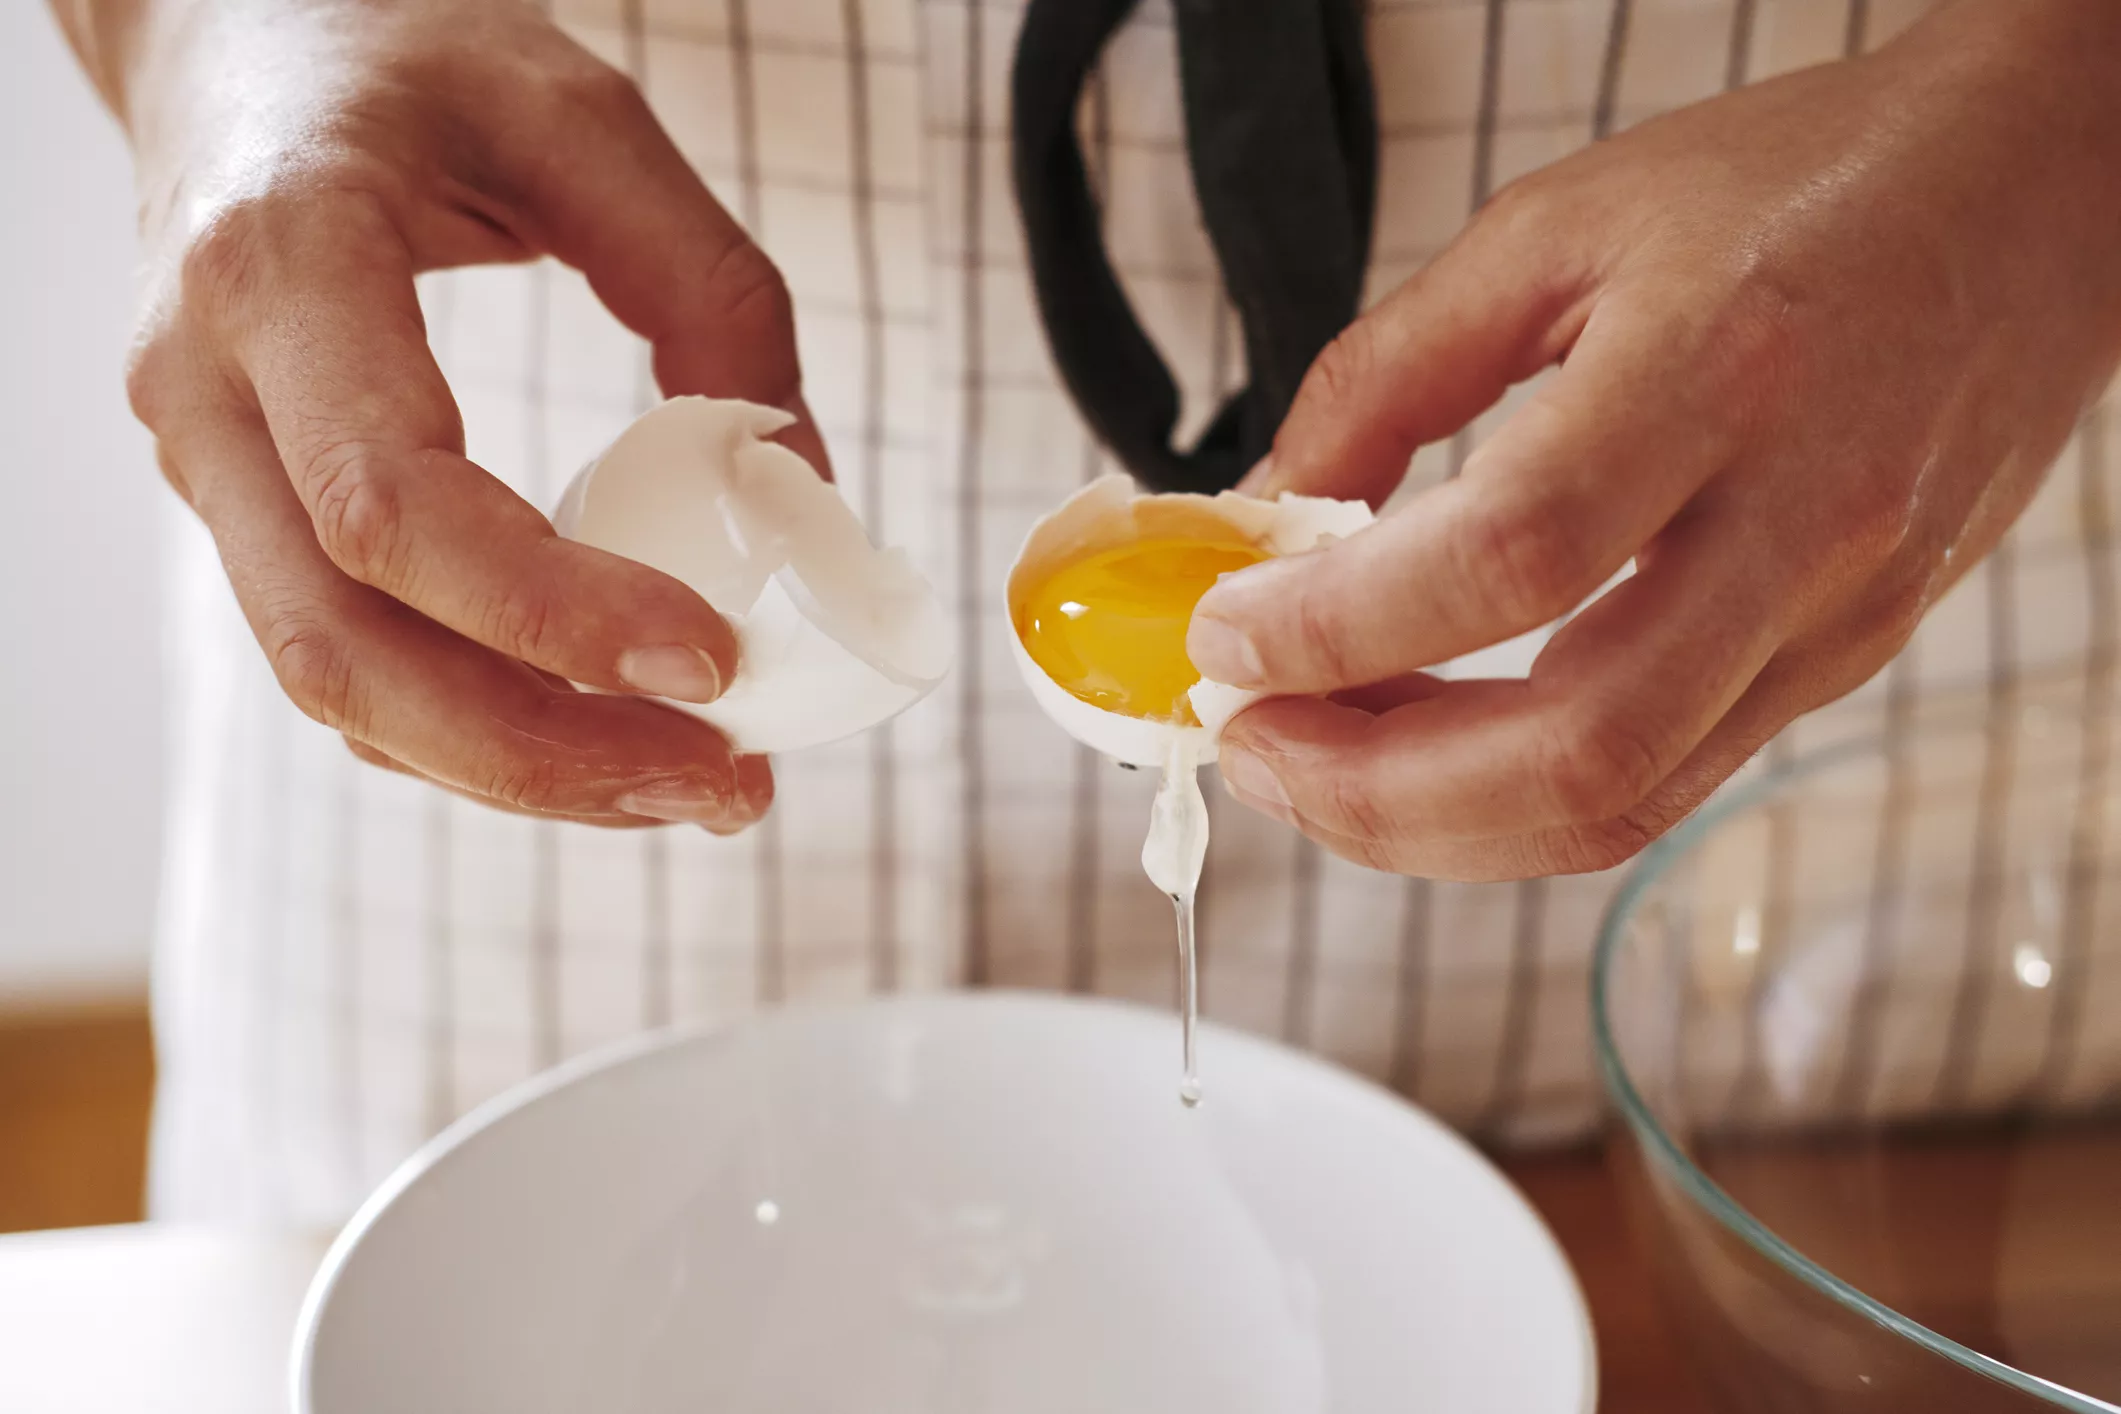 Woman's hands separating egg, close-up